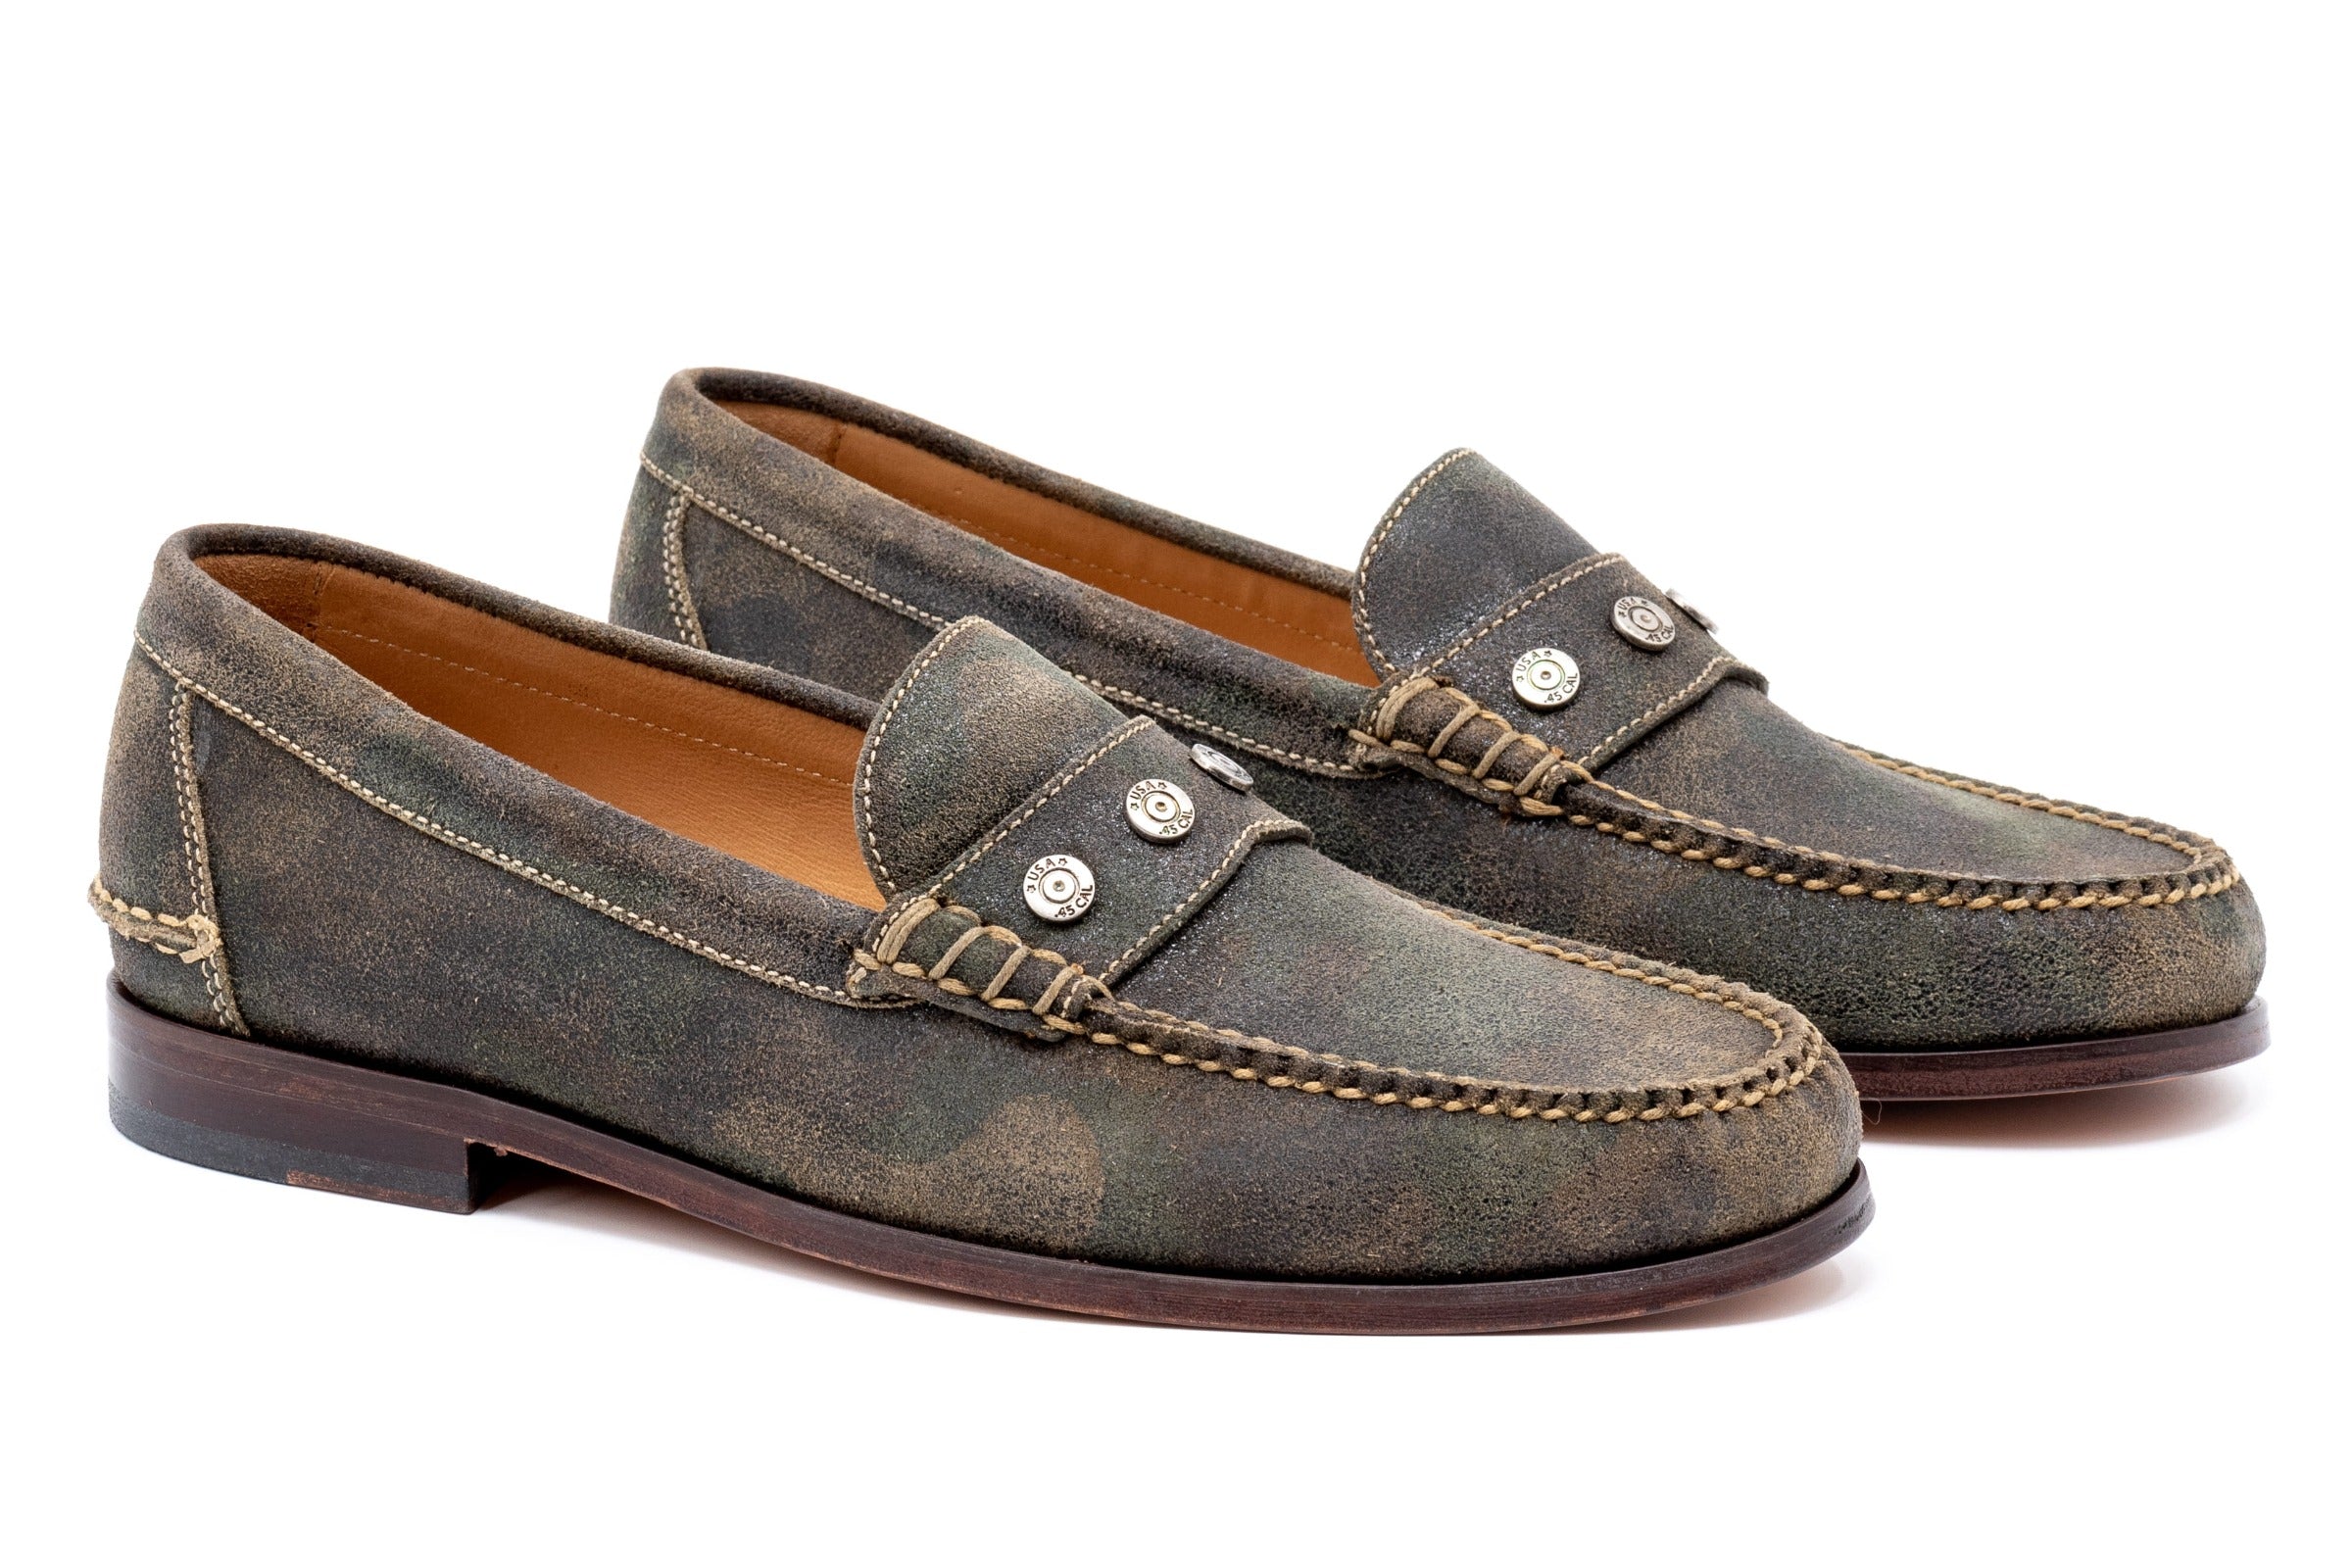 2nd Amendment Suede Penny Loafers - Camo